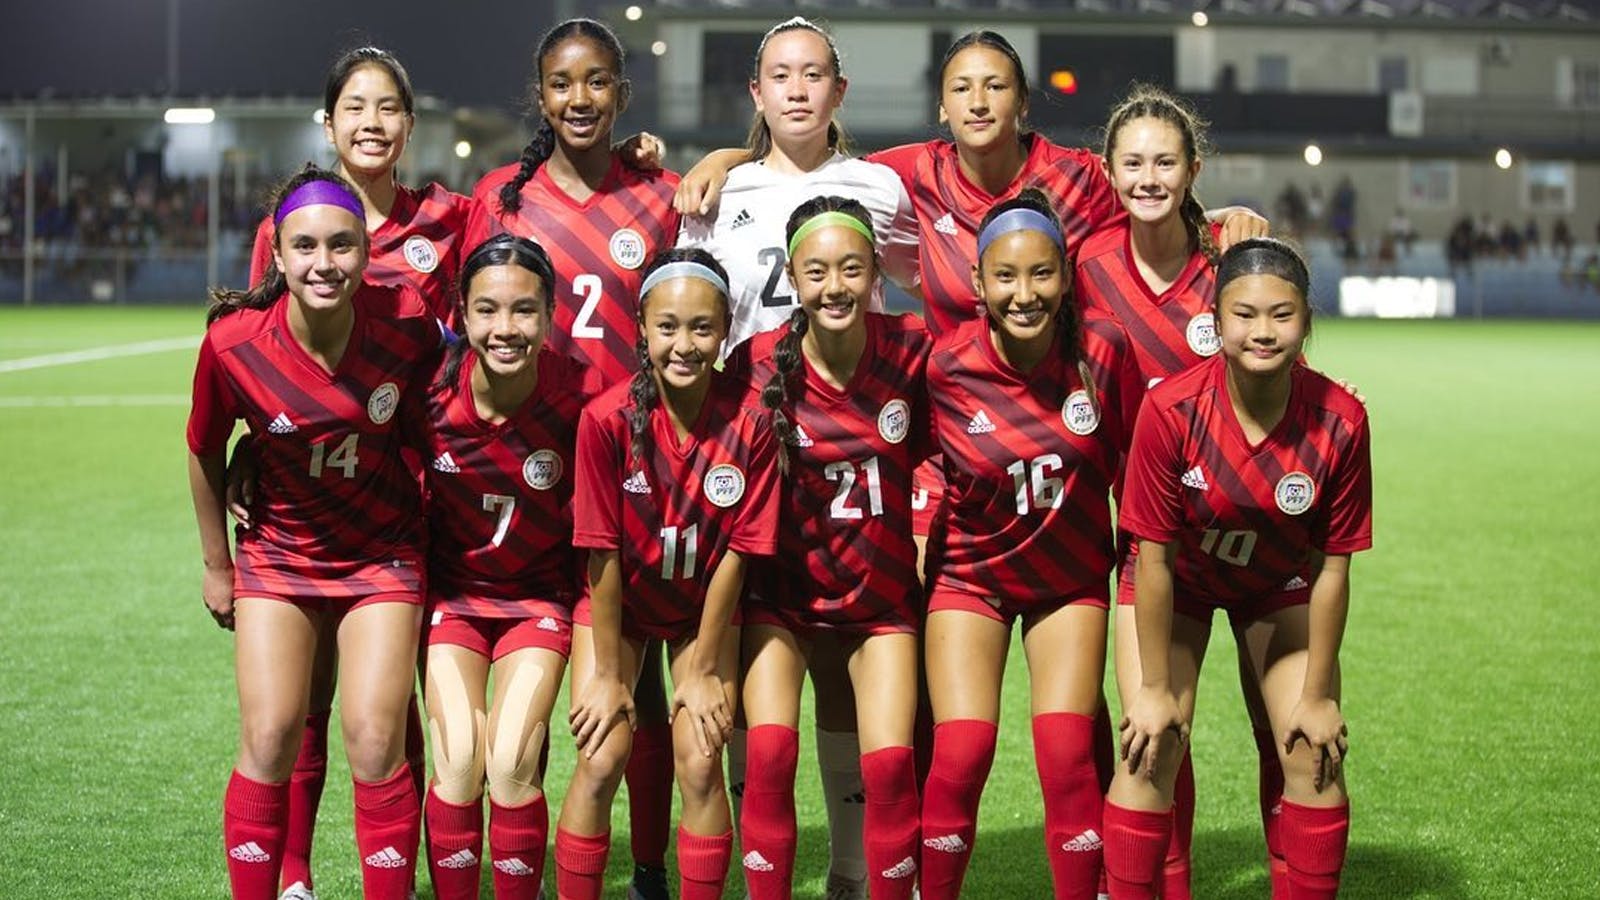 Hard work equals hat trick for Nina Mathelus as young Filipinas win opener of AFC U17 Women’s Asian Cup qualifiers 